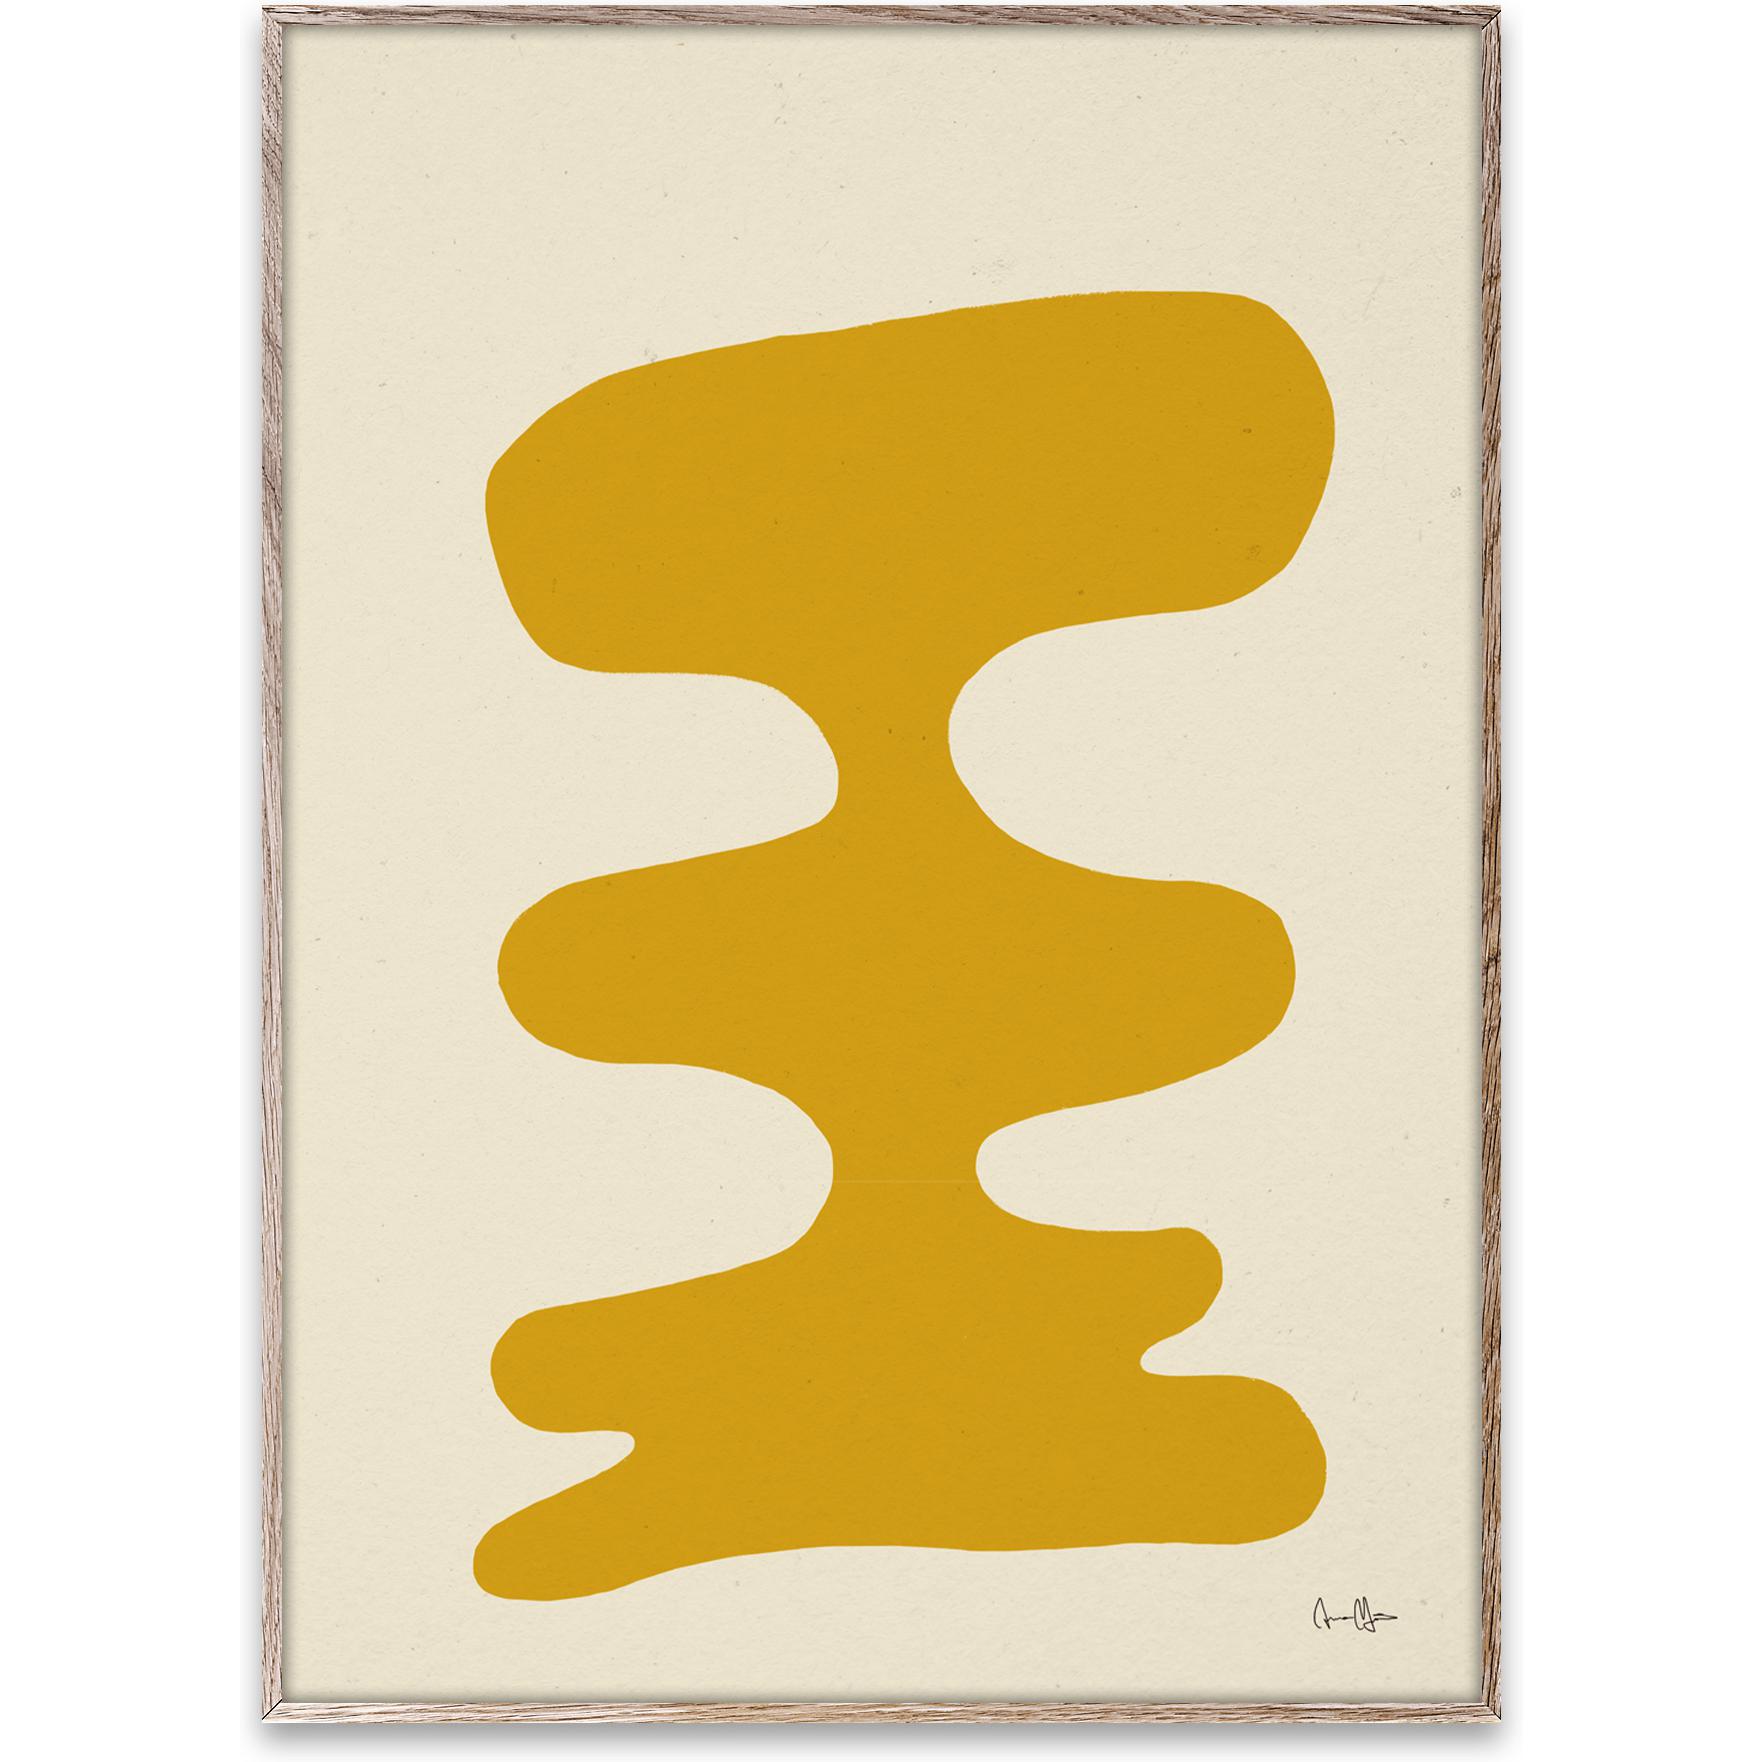 Paper Collective Soft Yellow Poster, 30x40 Cm